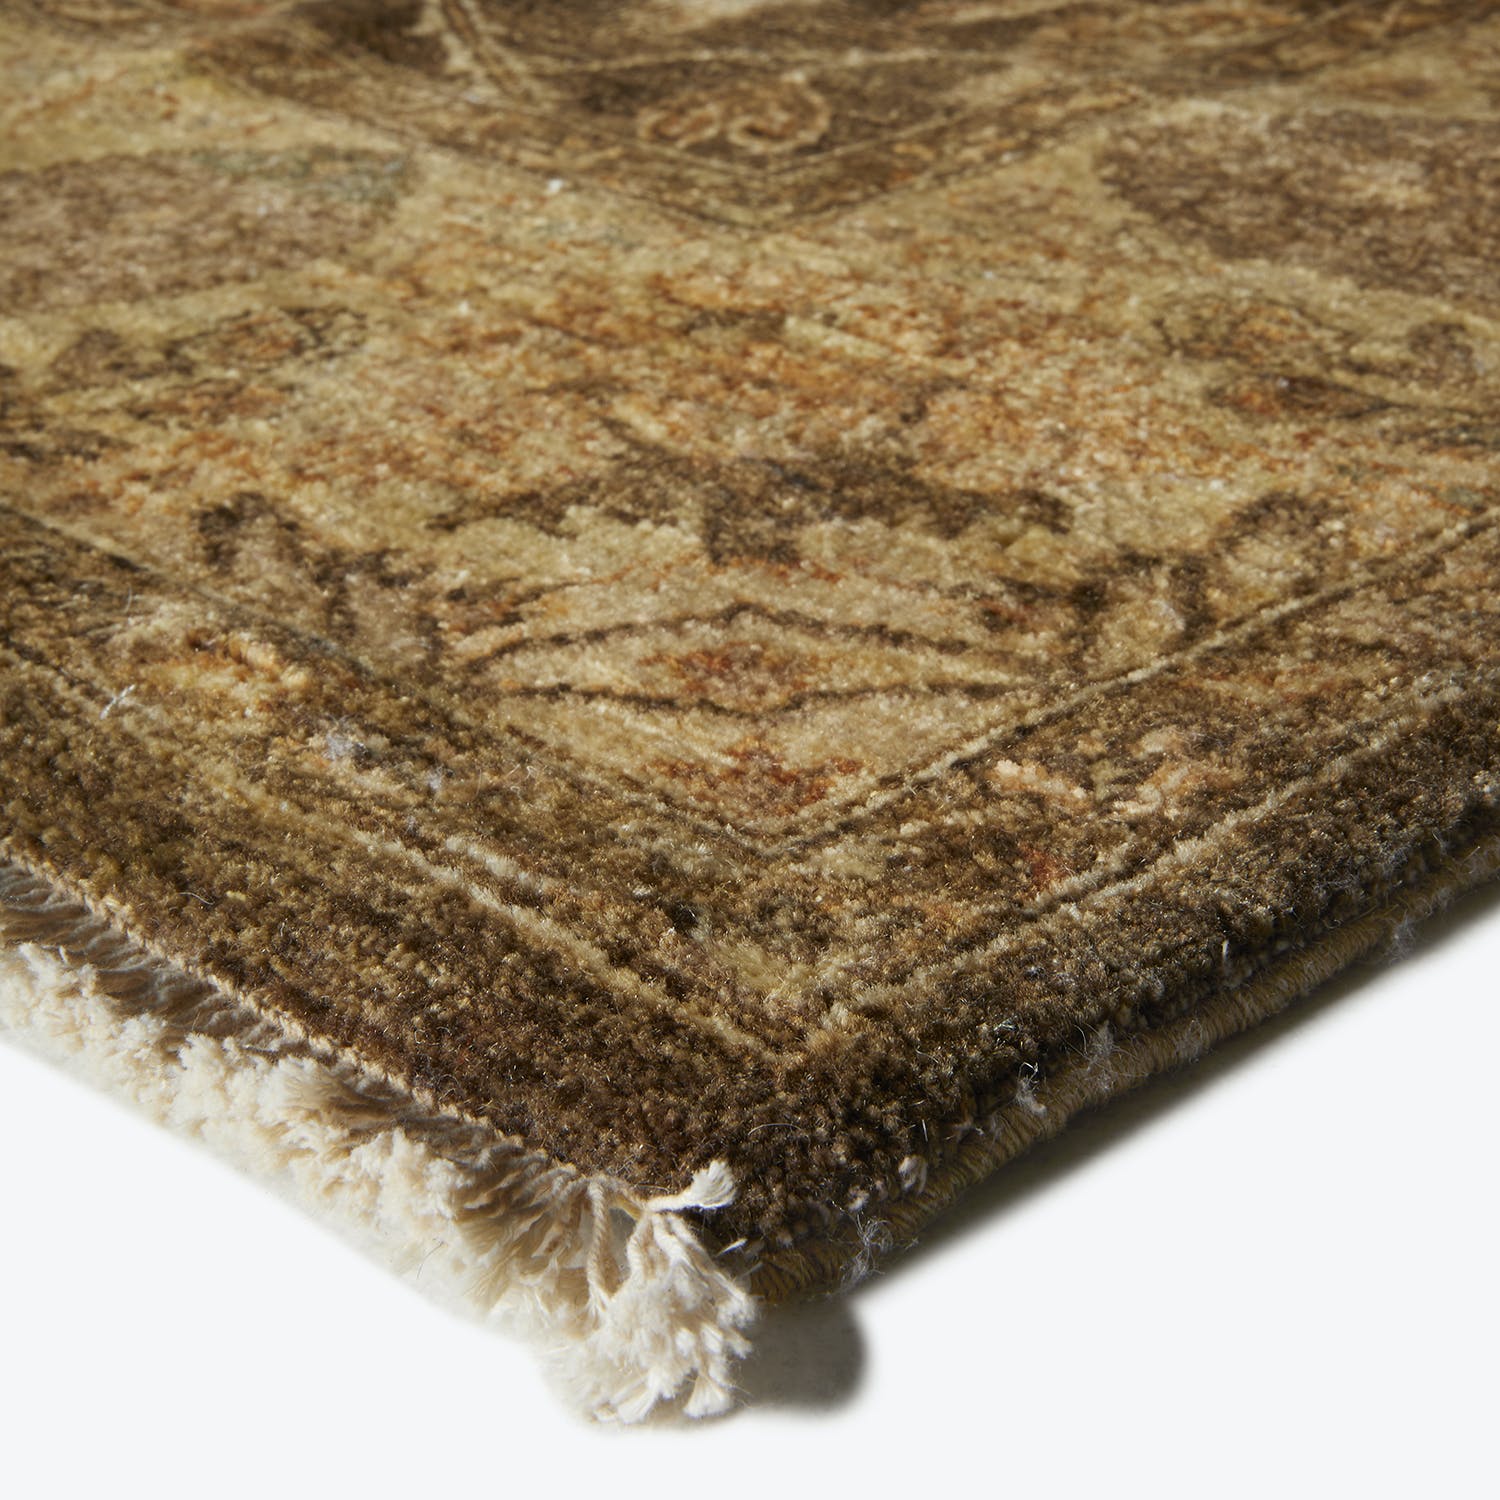 A close-up of a plush, earth-toned, floral-patterned rug with fringe.